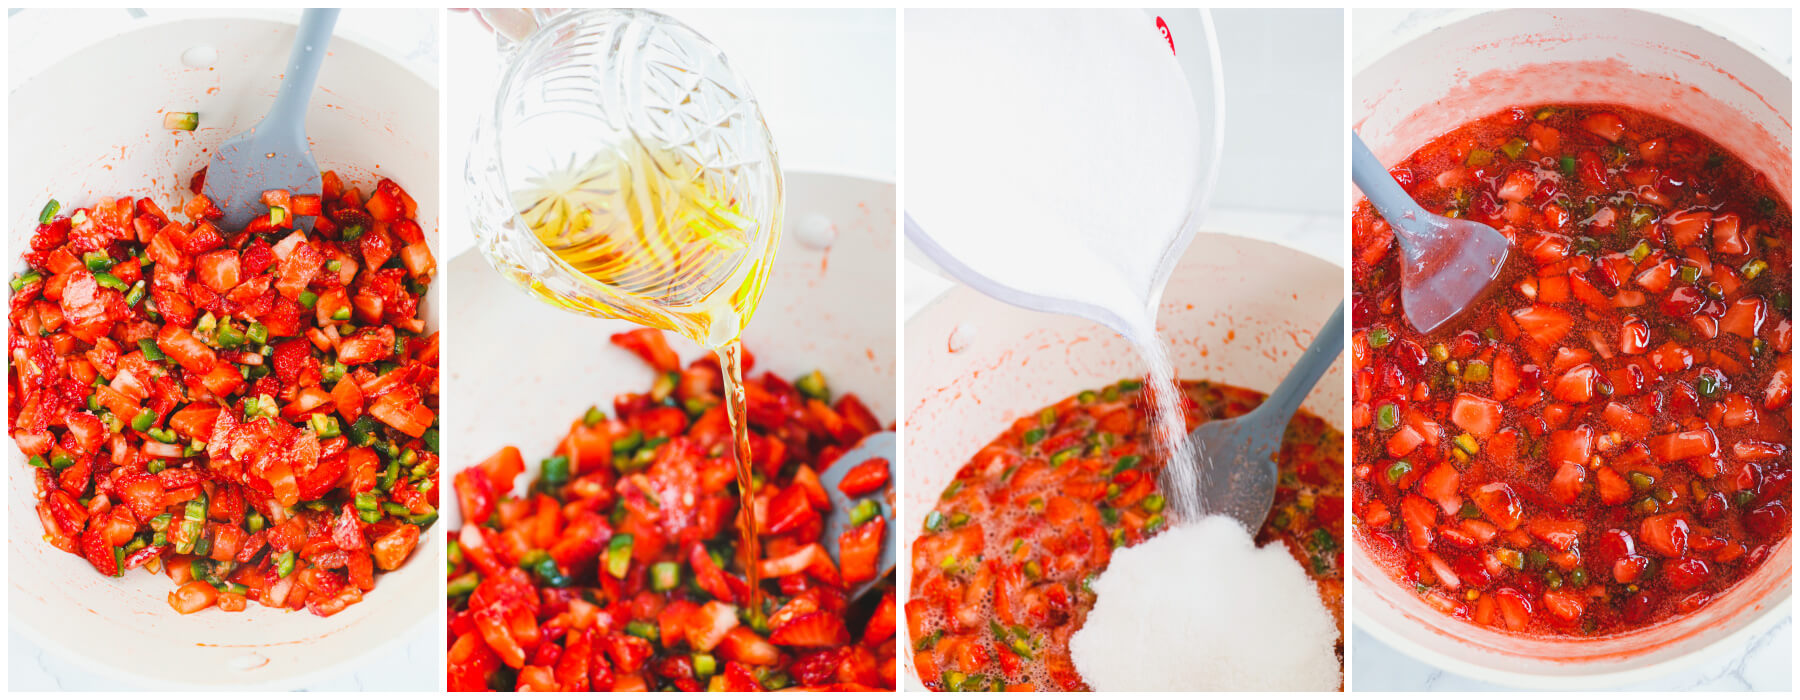 Process images showing how to make strawberry jalapeño jam.